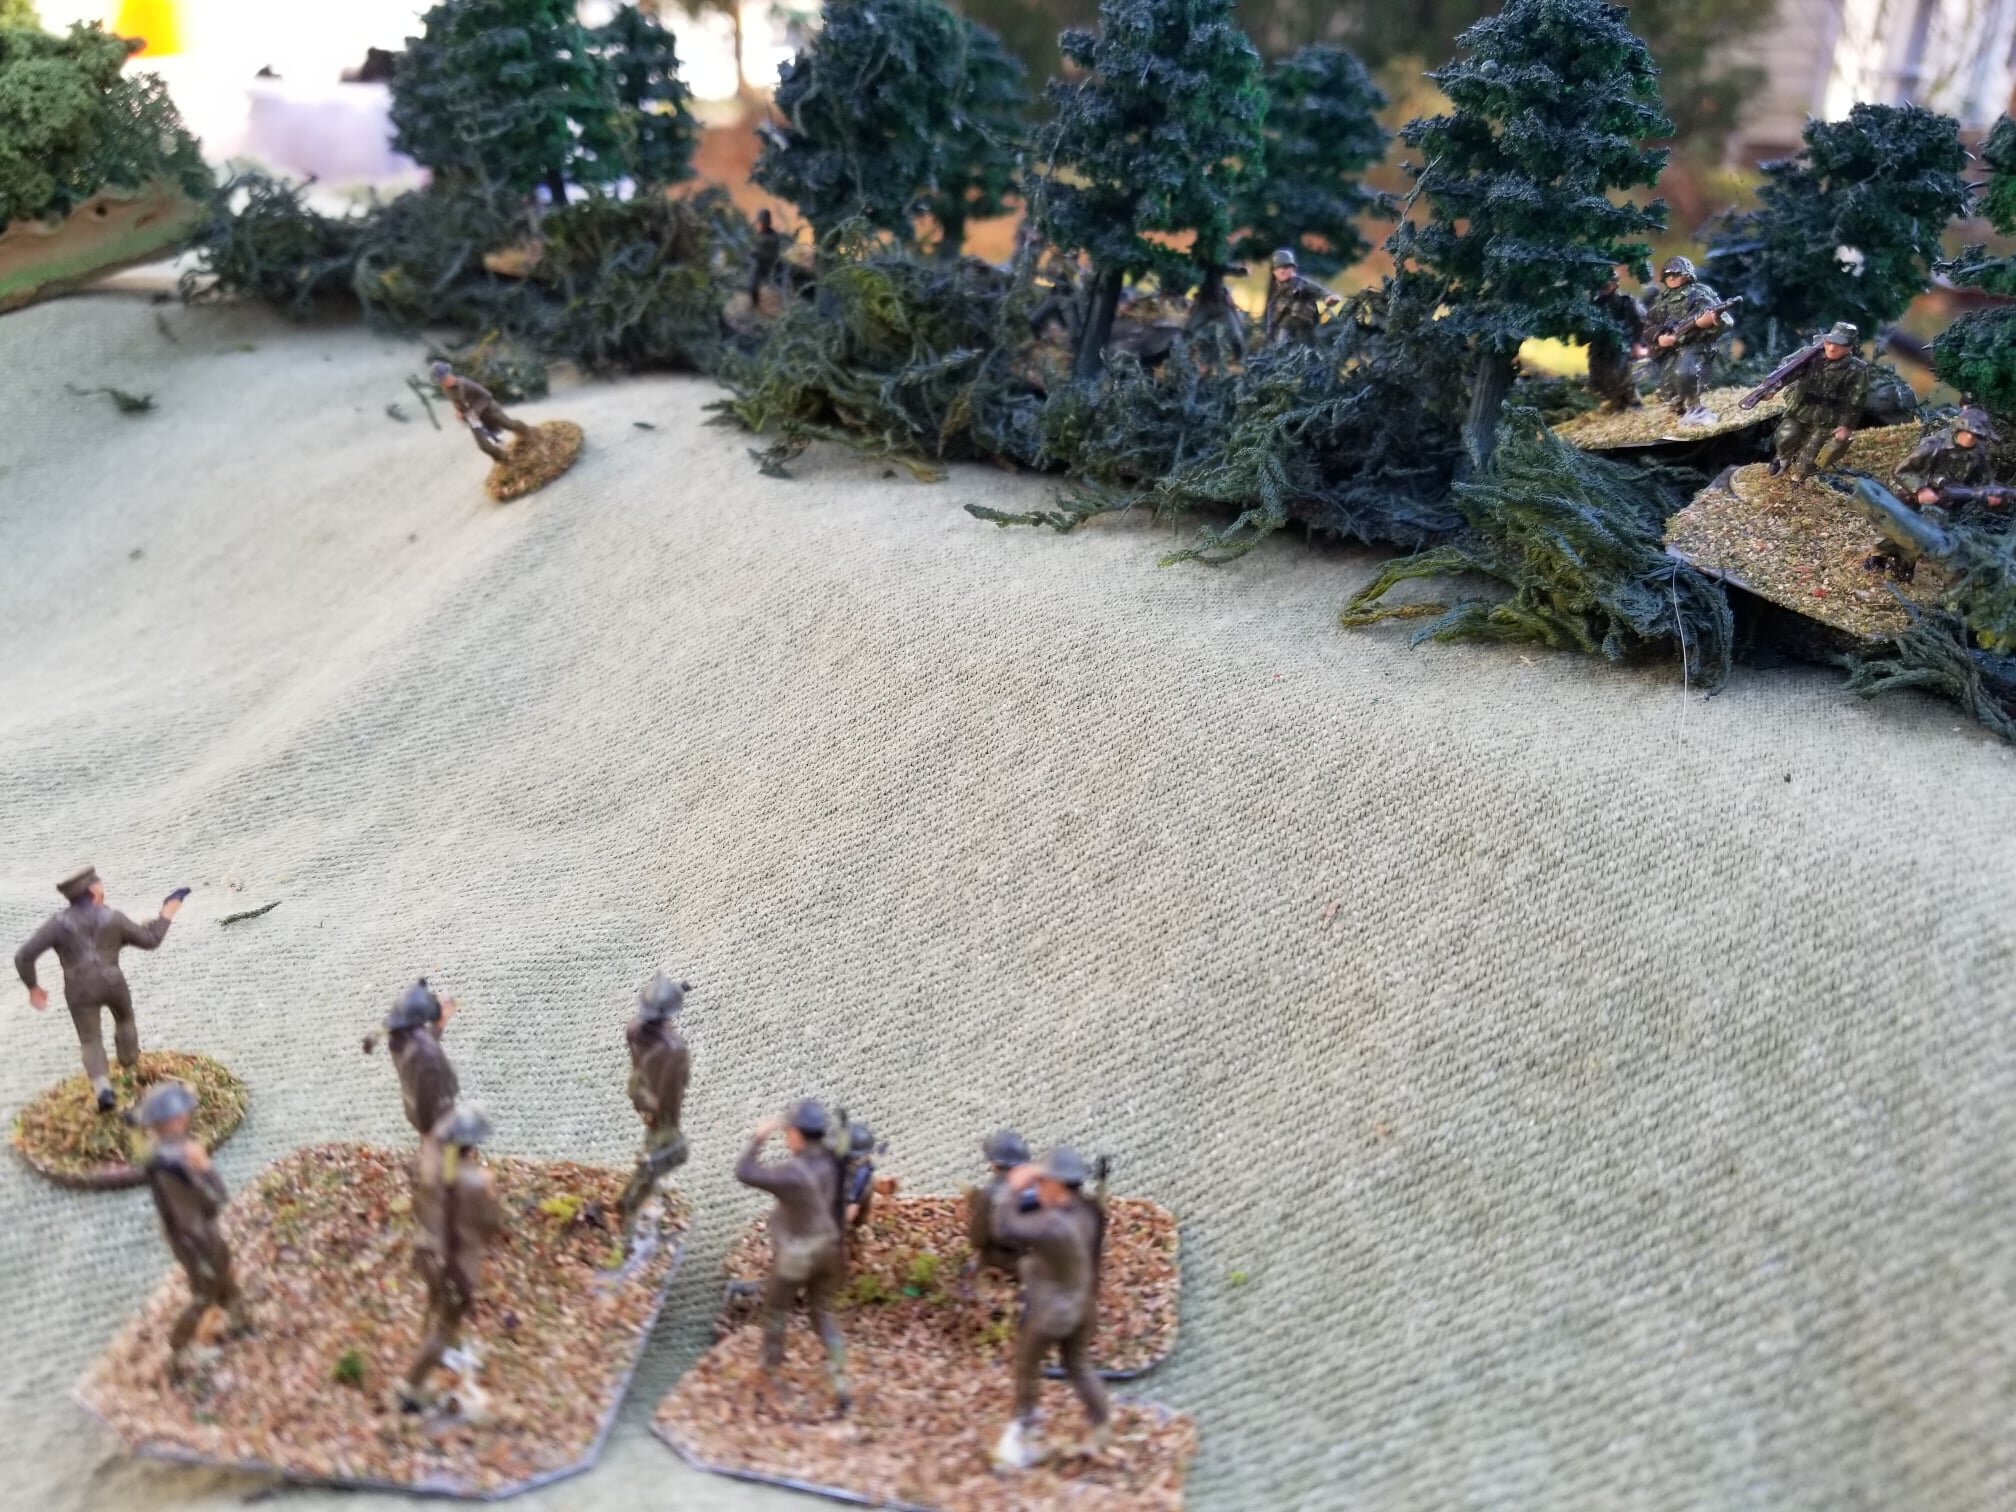  At the close of the game, the Polish HQ squad confronts the horde of Panzergrenadiers emerging from the woods. 